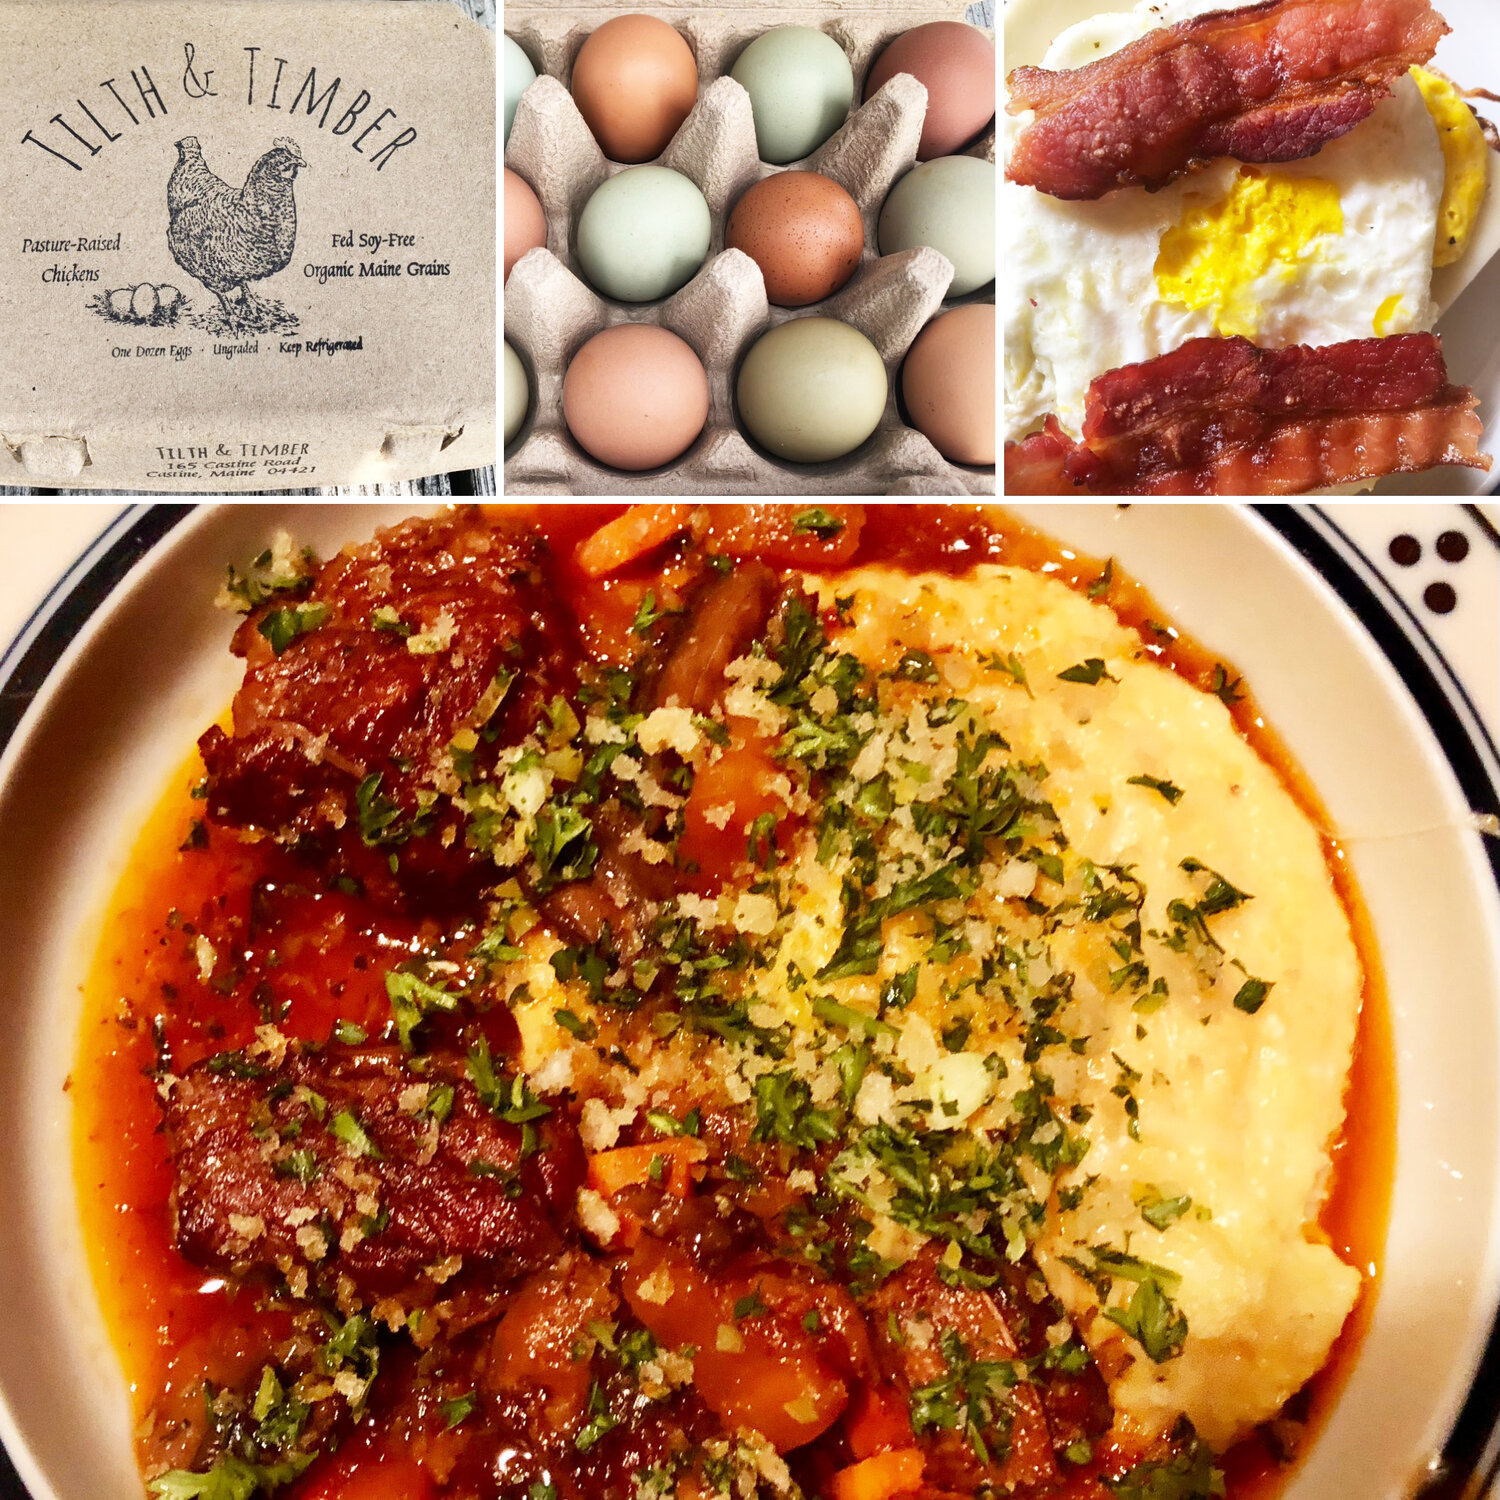 A recent trip to Maine revealed the deliciousness of Tilth & Timber’s organic pullet eggs, top, and Beef Short Rib Bourguignon with Garlicky Panko Gremolata, bottom.